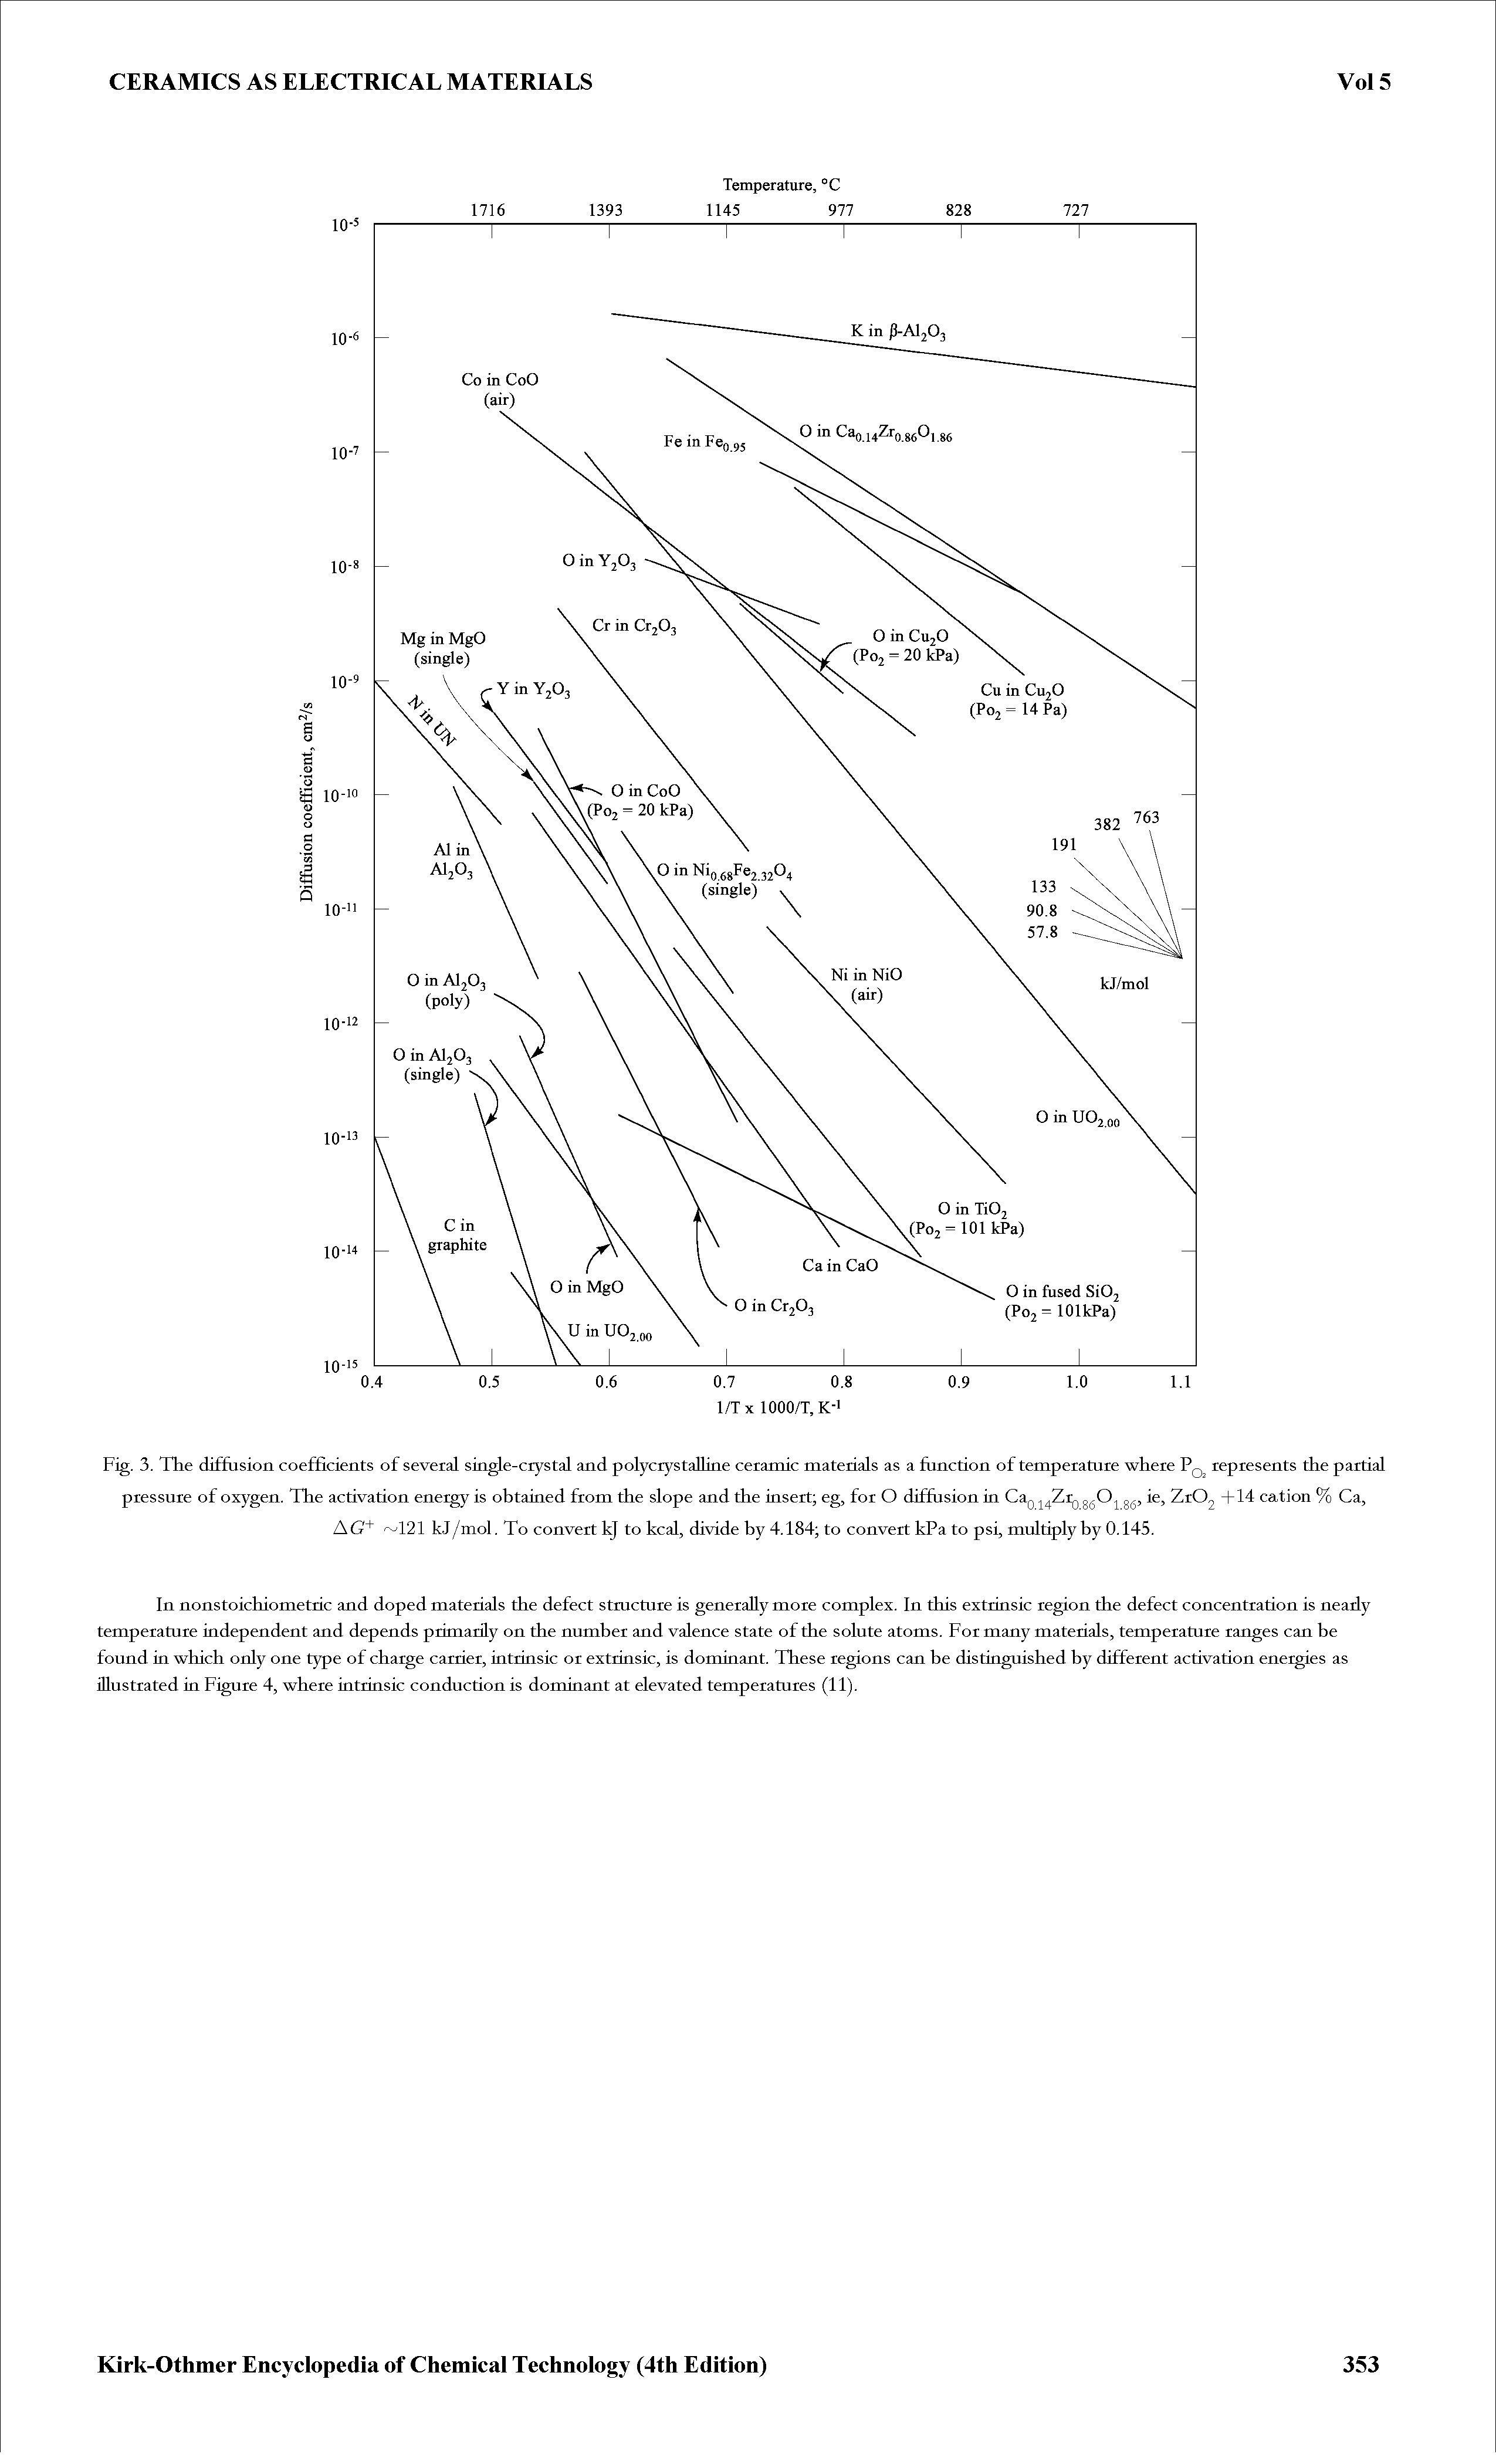 Fig. 3. The diffusion coefficients of several single-crystal and polycrystaUine ceramic materials as a function of temperature where Pq represents the partial pressure of oxygen. The activation energy is obtained from the slope and the insert eg, for O diffusion in CaQ 86 186 2 Tl4 cation % Ca,...